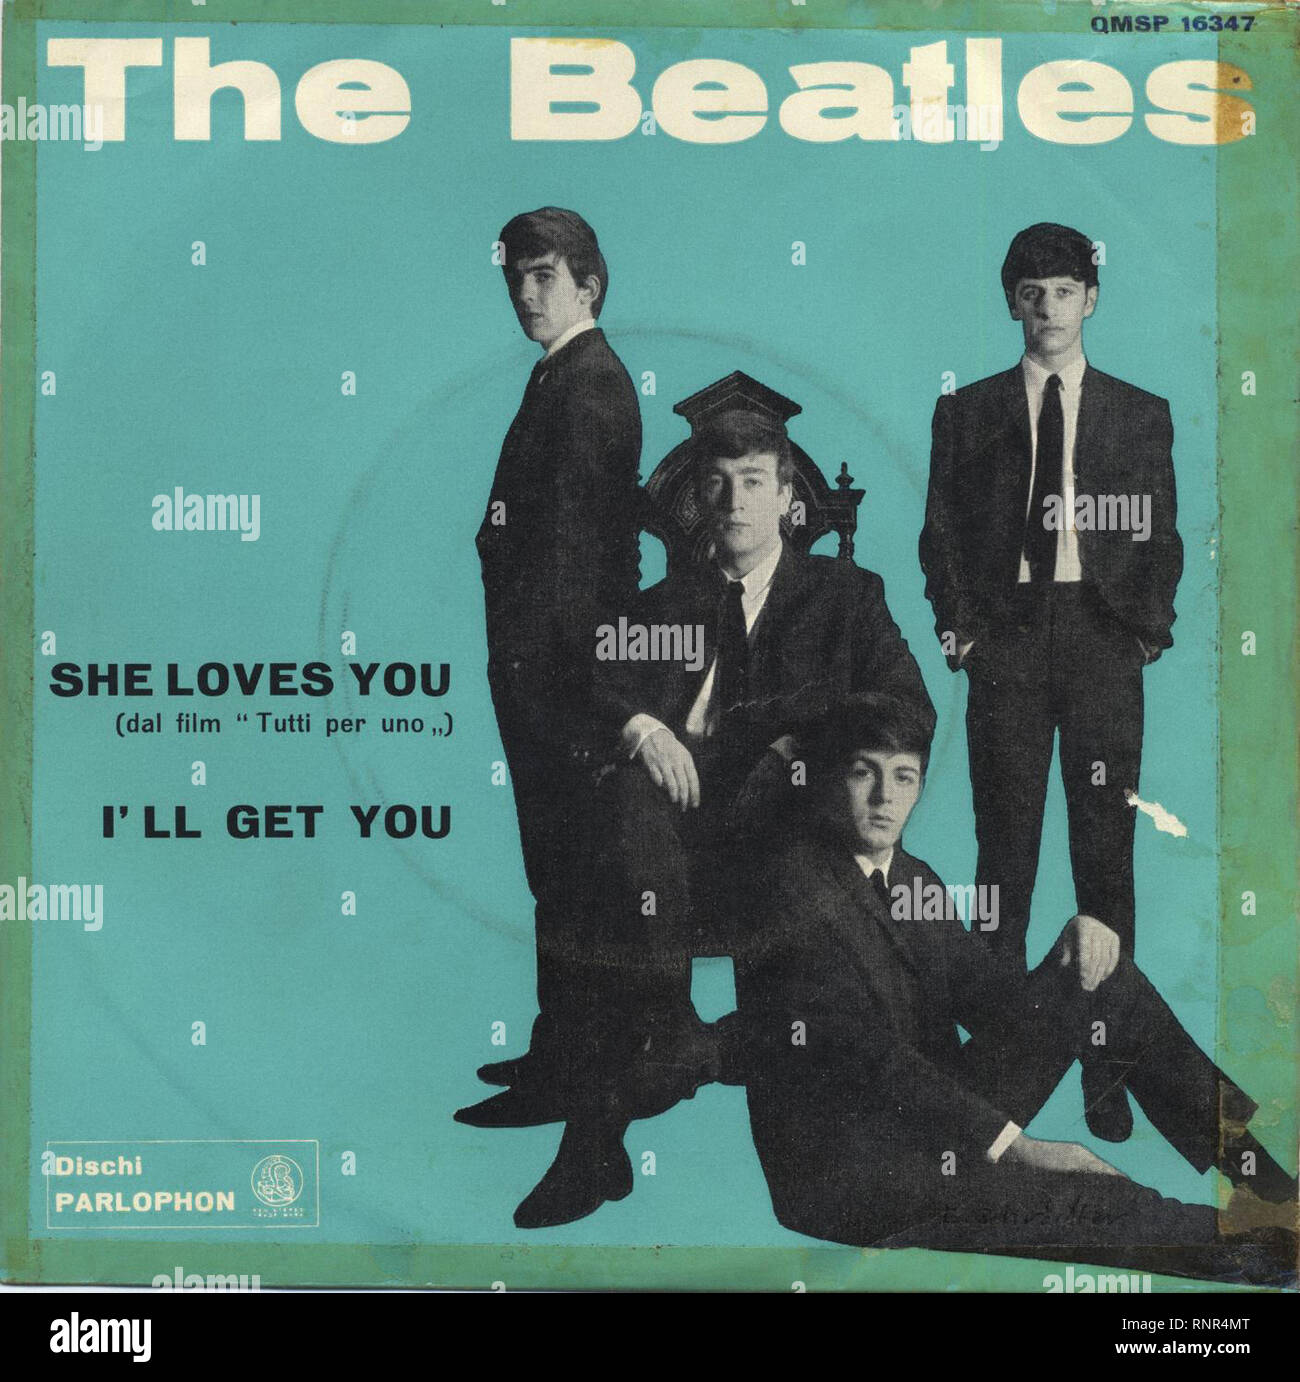 The Beatles - She loves you - Vintage Cover album Foto Stock